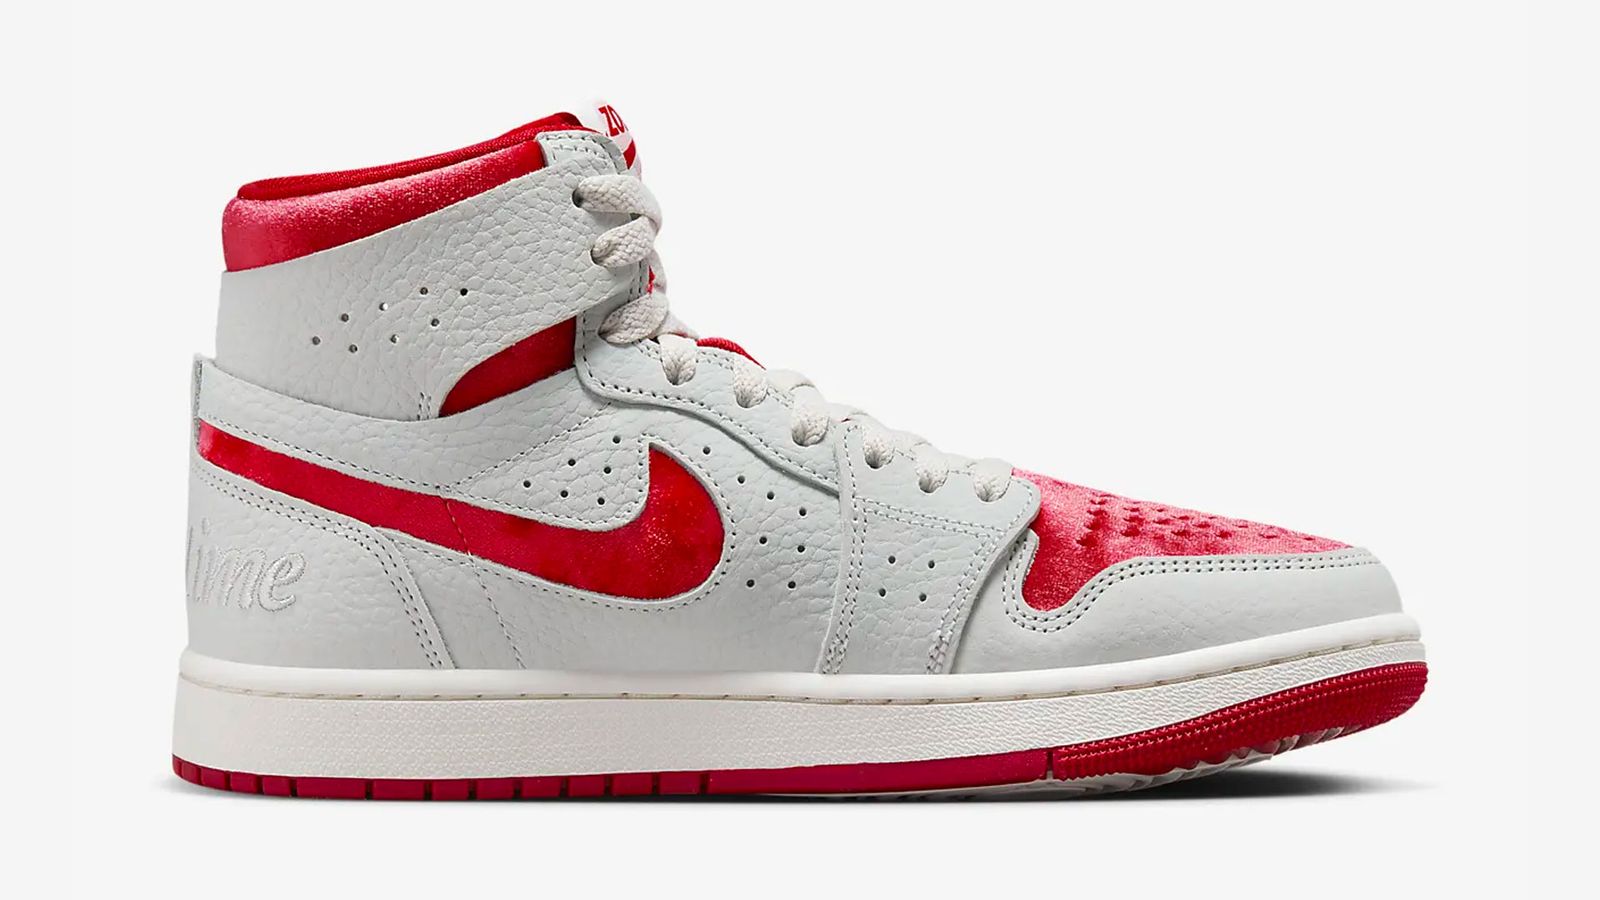 Best sneakers for Valentine's Day - Air Jordan 1 Zoom CMFT 2 "Valentine's Day" product image of a White leather and Red suede sneaker.